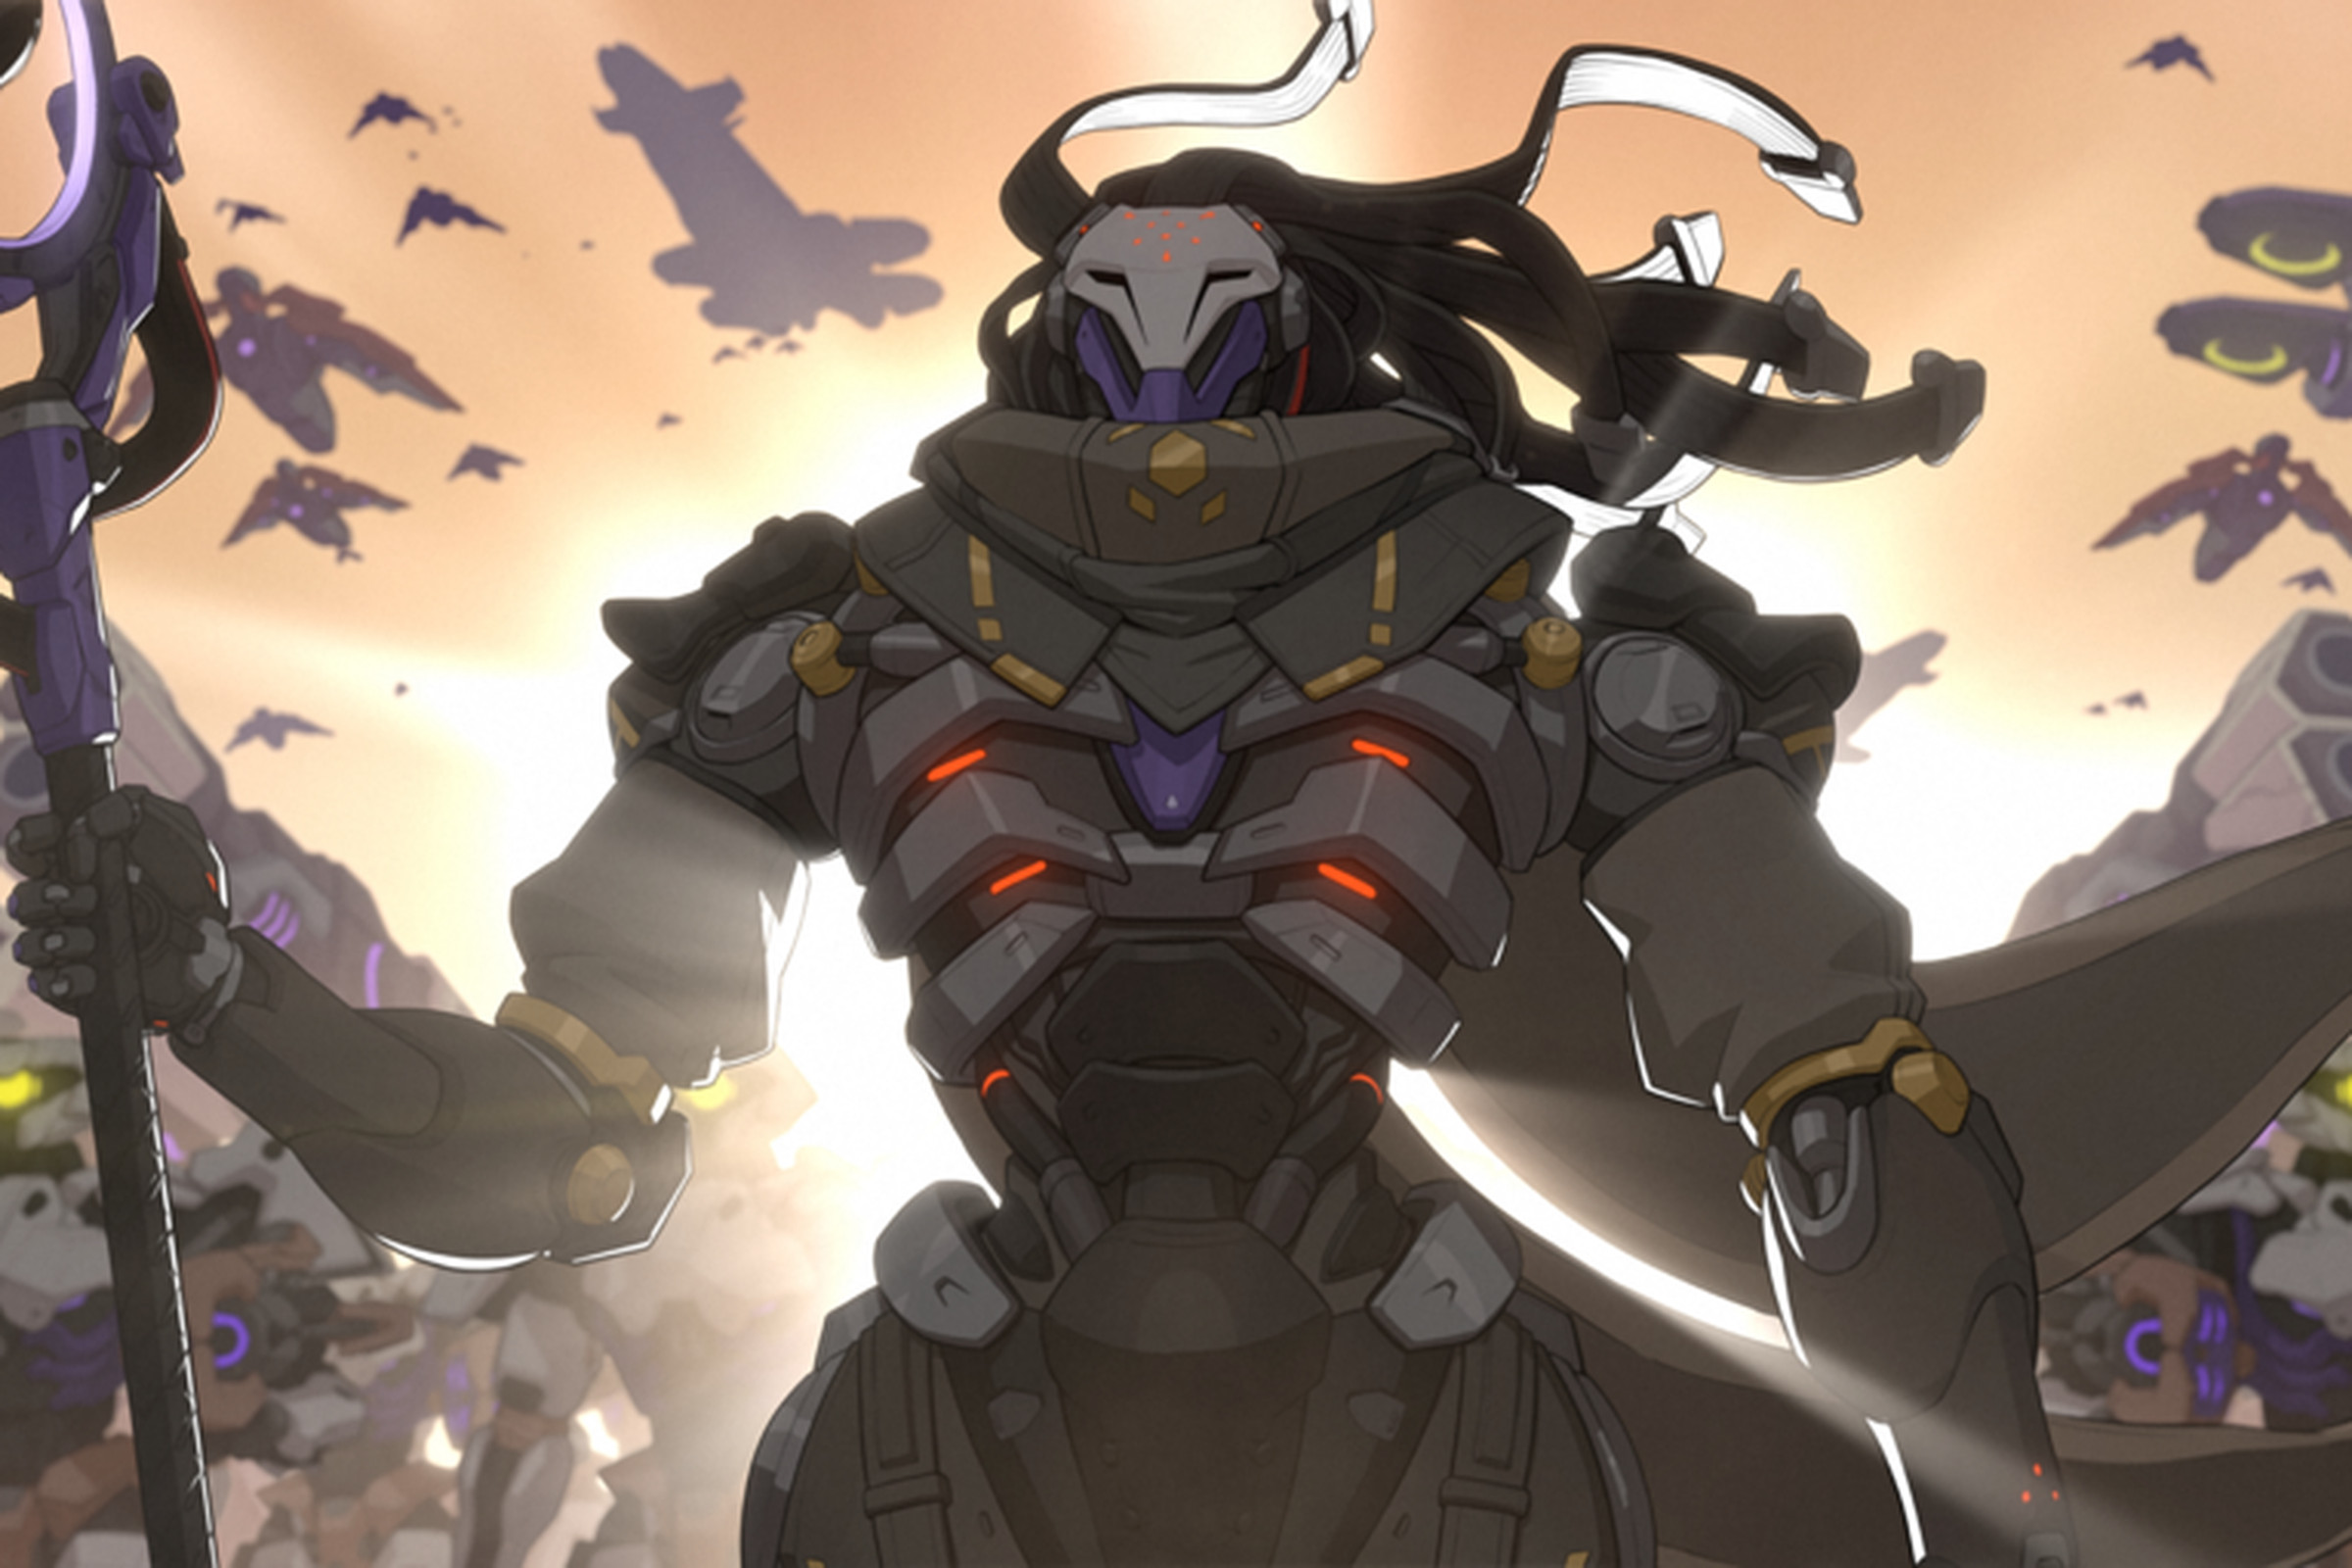 Graphic from Overwatch 2’s new hero reveal trailer featuring a sentient robot holding a giant staff with robotic hair blowing in the breeze.